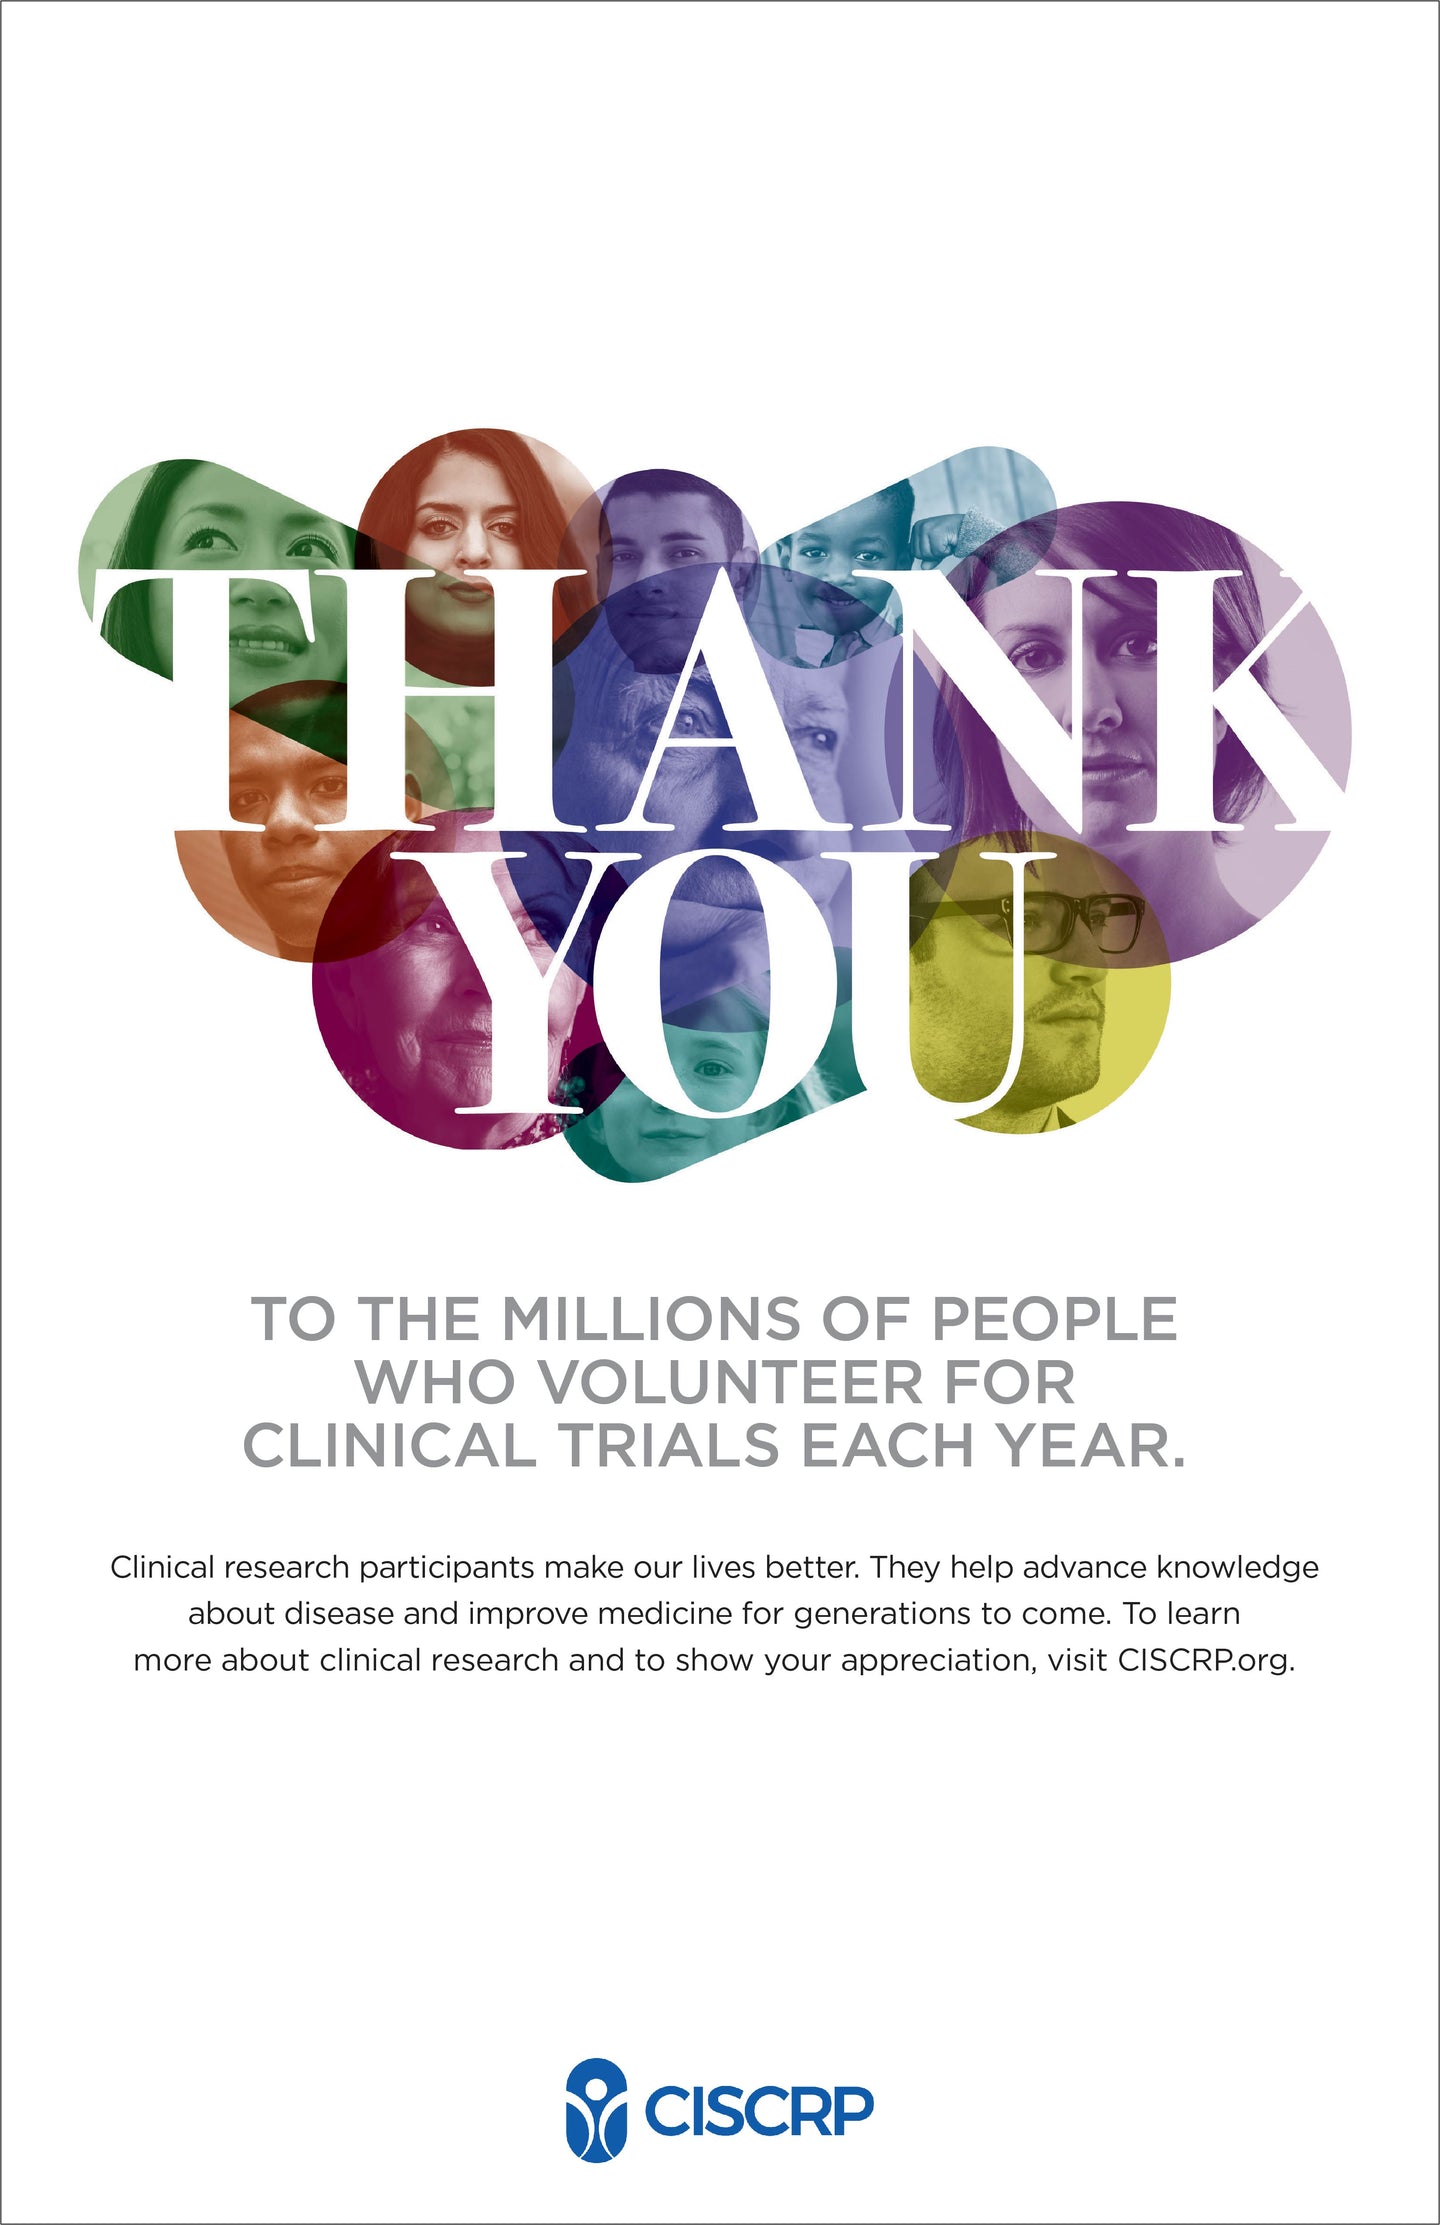 2019 Clinical Trials Supplement, USA Today Thank You Poster